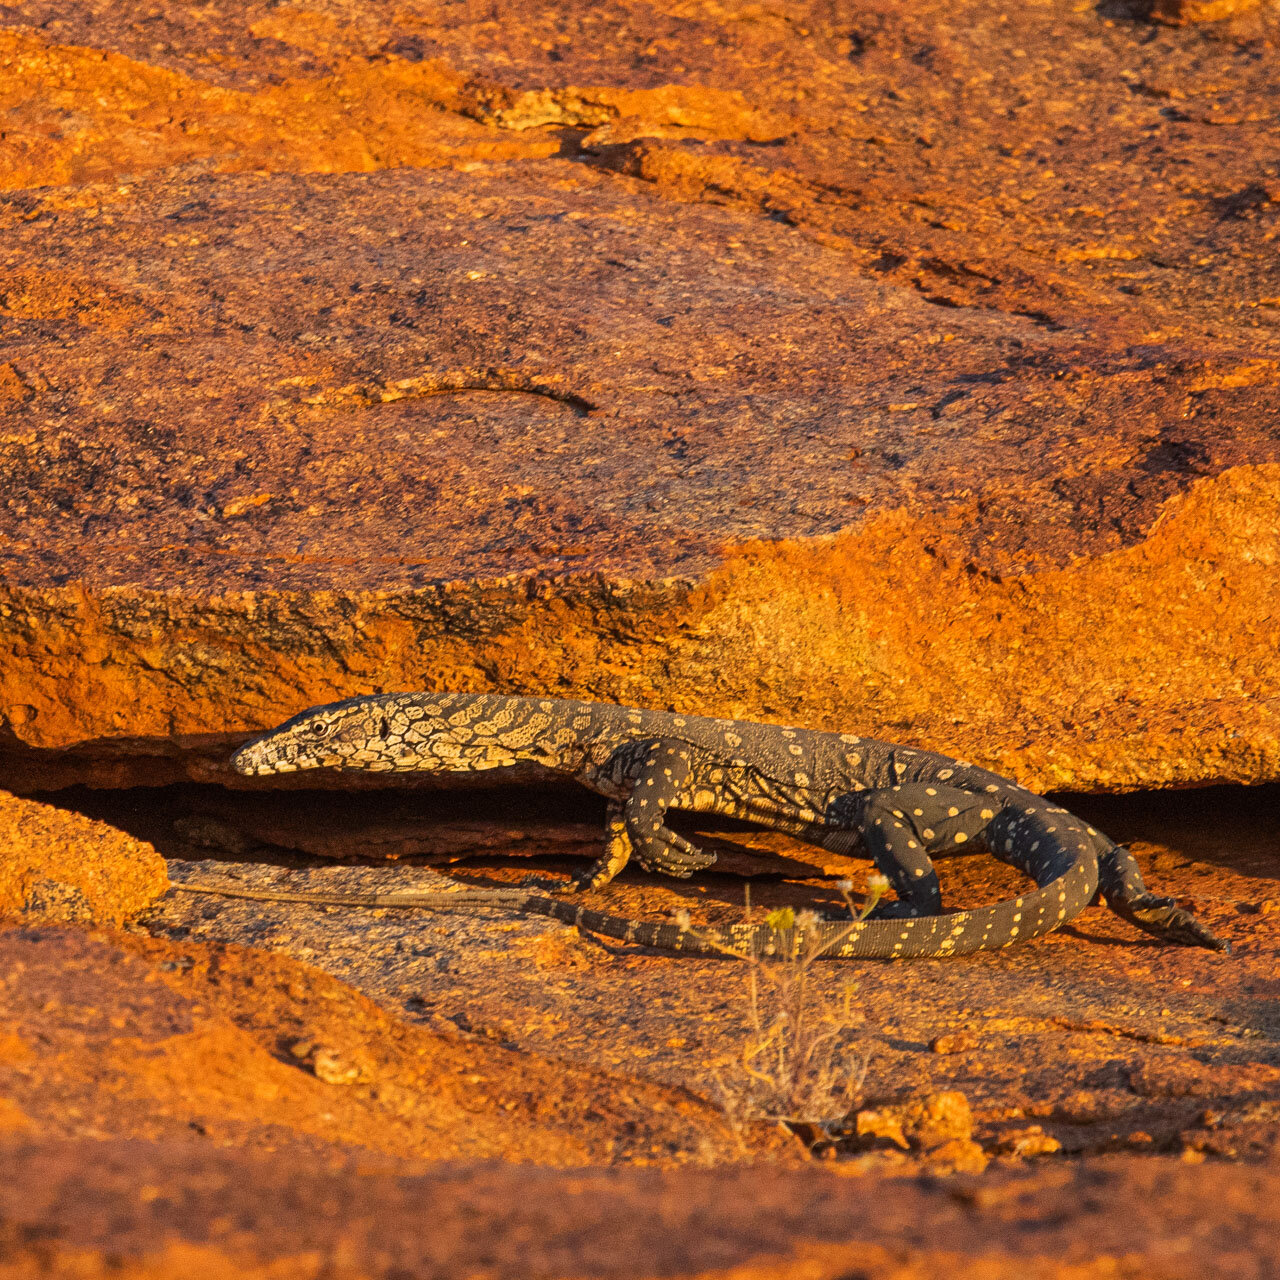 Australia's largest monitor lizard, the perentie enjoying the last warmth of the sun on Budara Rock at Wooleen Station